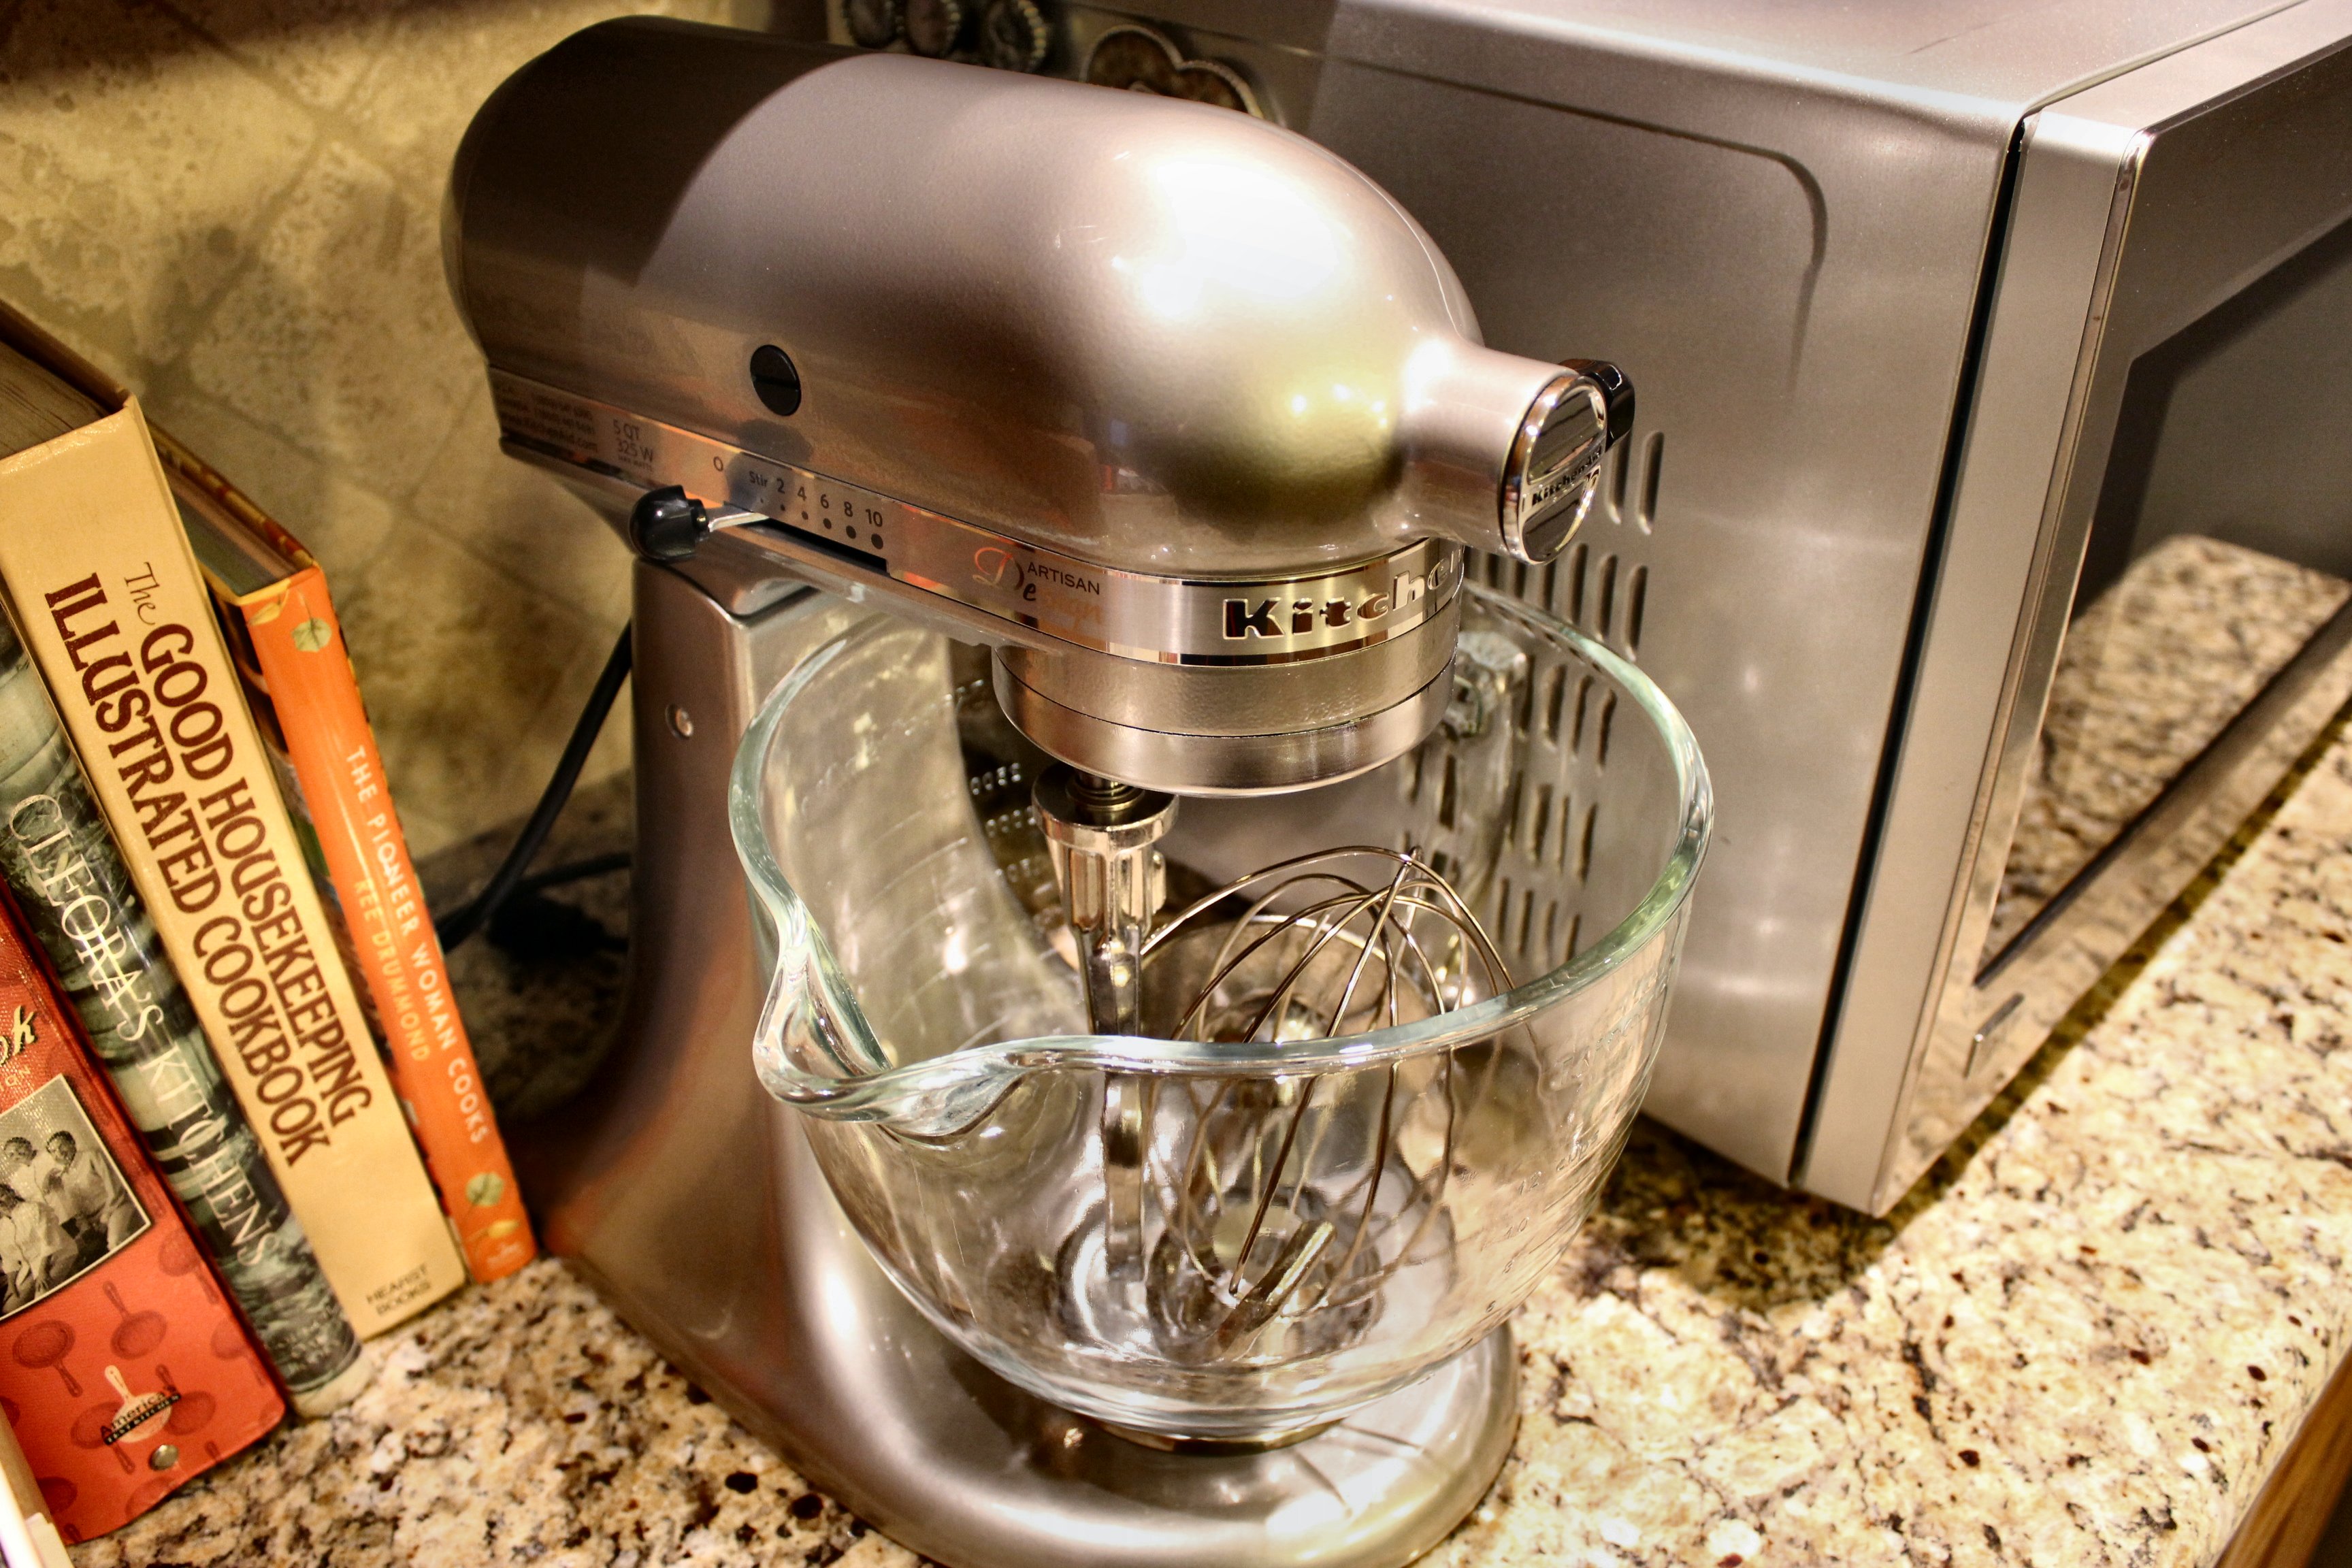 Things I Love, Volume 5: My New KitchenAid Mixer from Pioneer